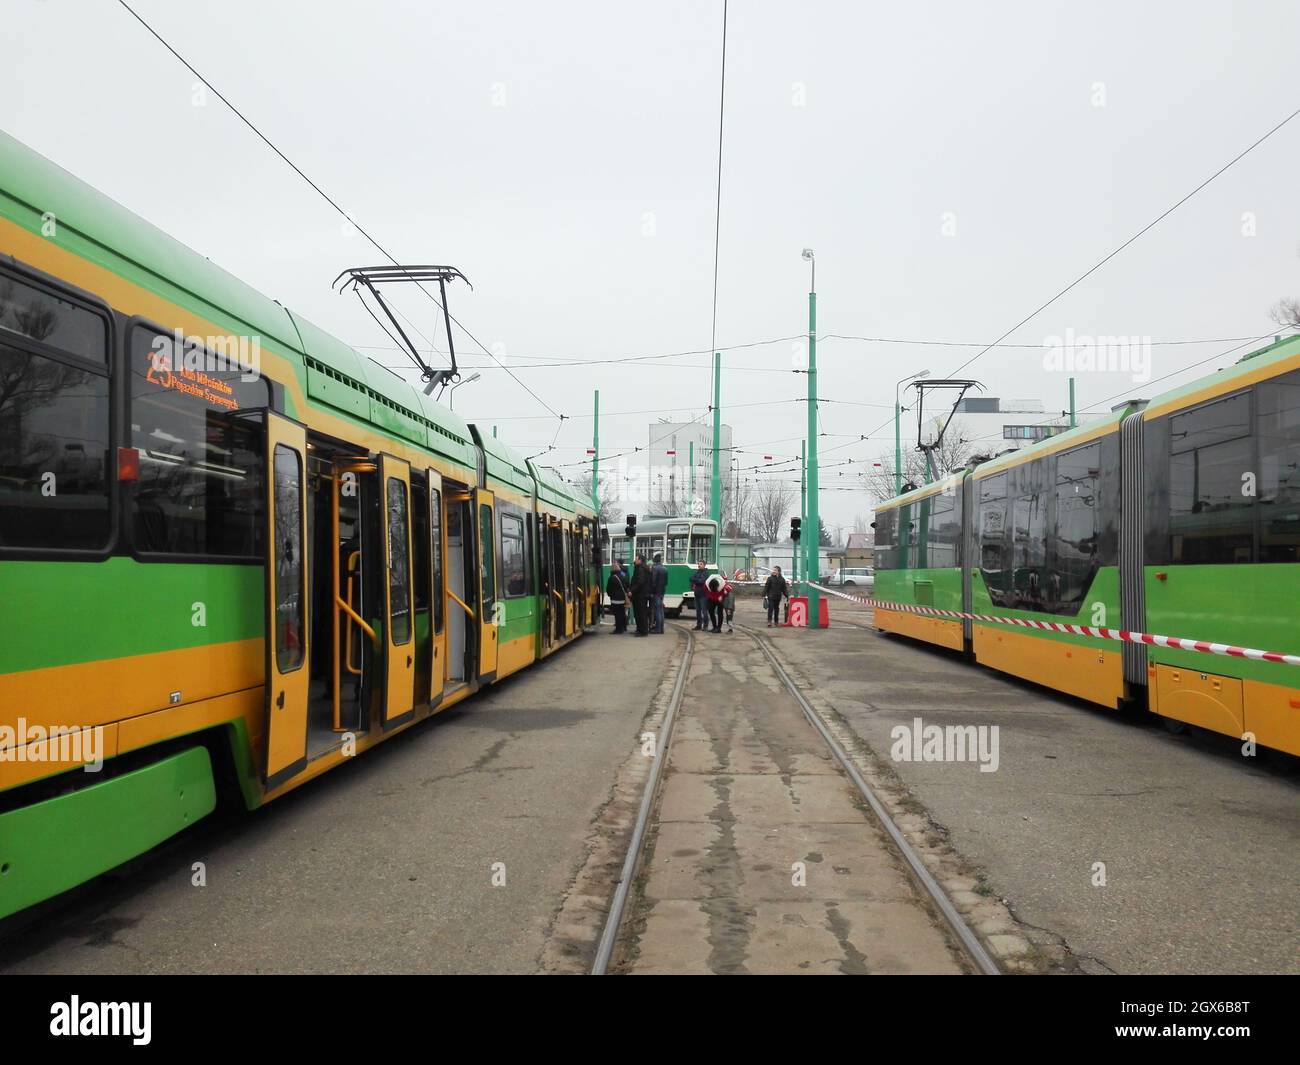 POZNAN, POLAND - Nov 25, 2018: A green exhibition public transport tram  during the Katarzynki event in the Franowo area Stock Photo - Alamy